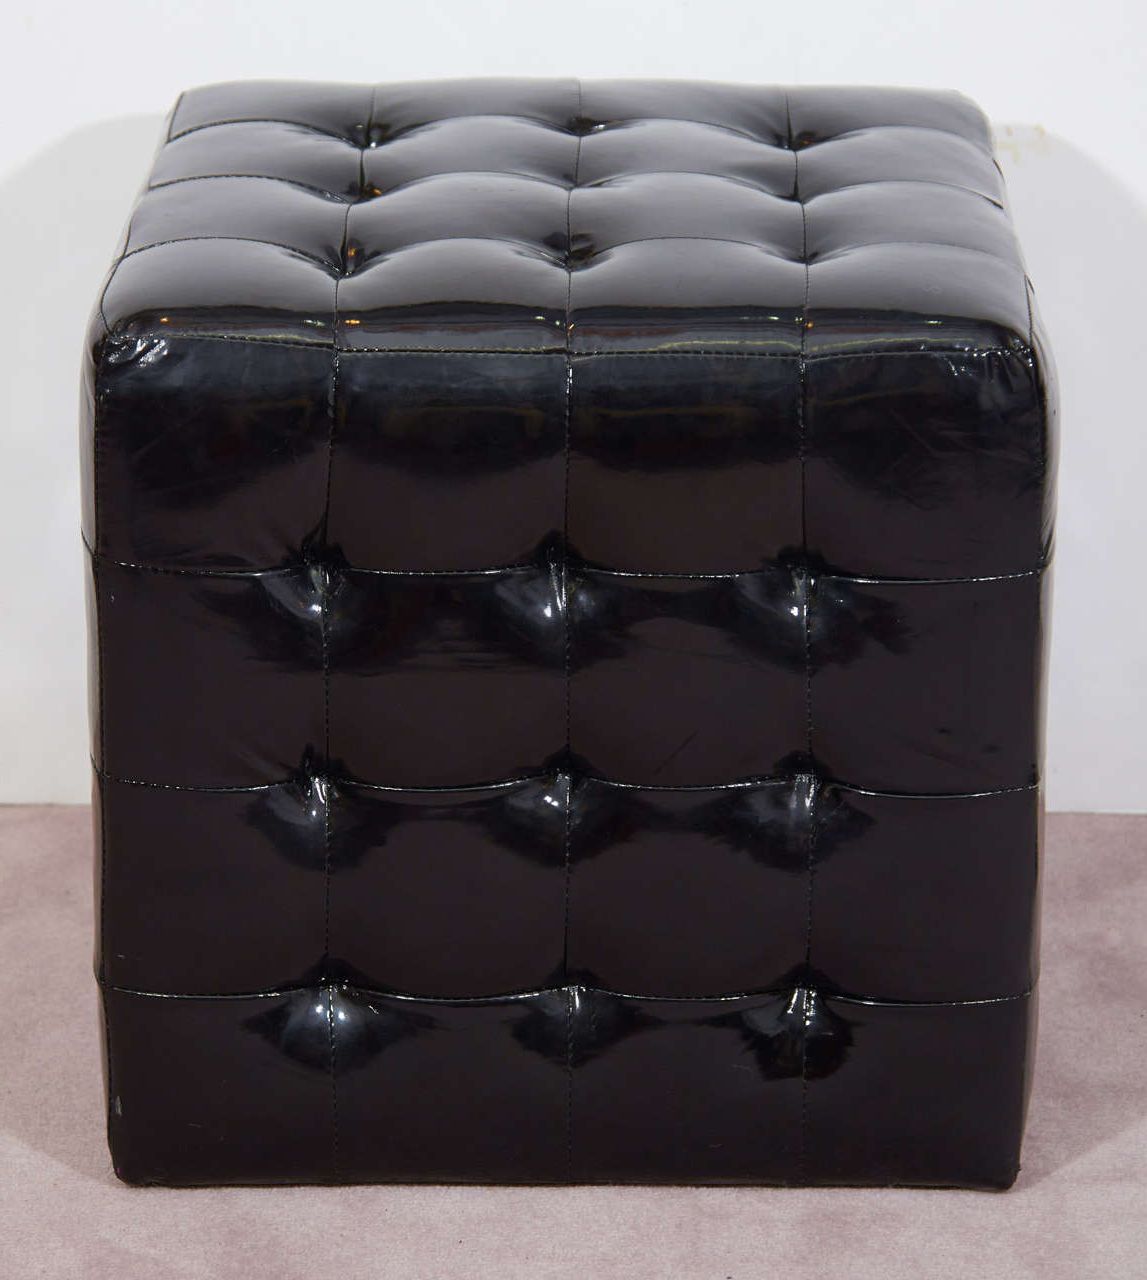 Black Wet Look Faux Leather Tufted Cube Ottomans Or Benches At 1stdibs For Best And Newest Black Faux Leather Column Tufted Ottomans (View 9 of 10)